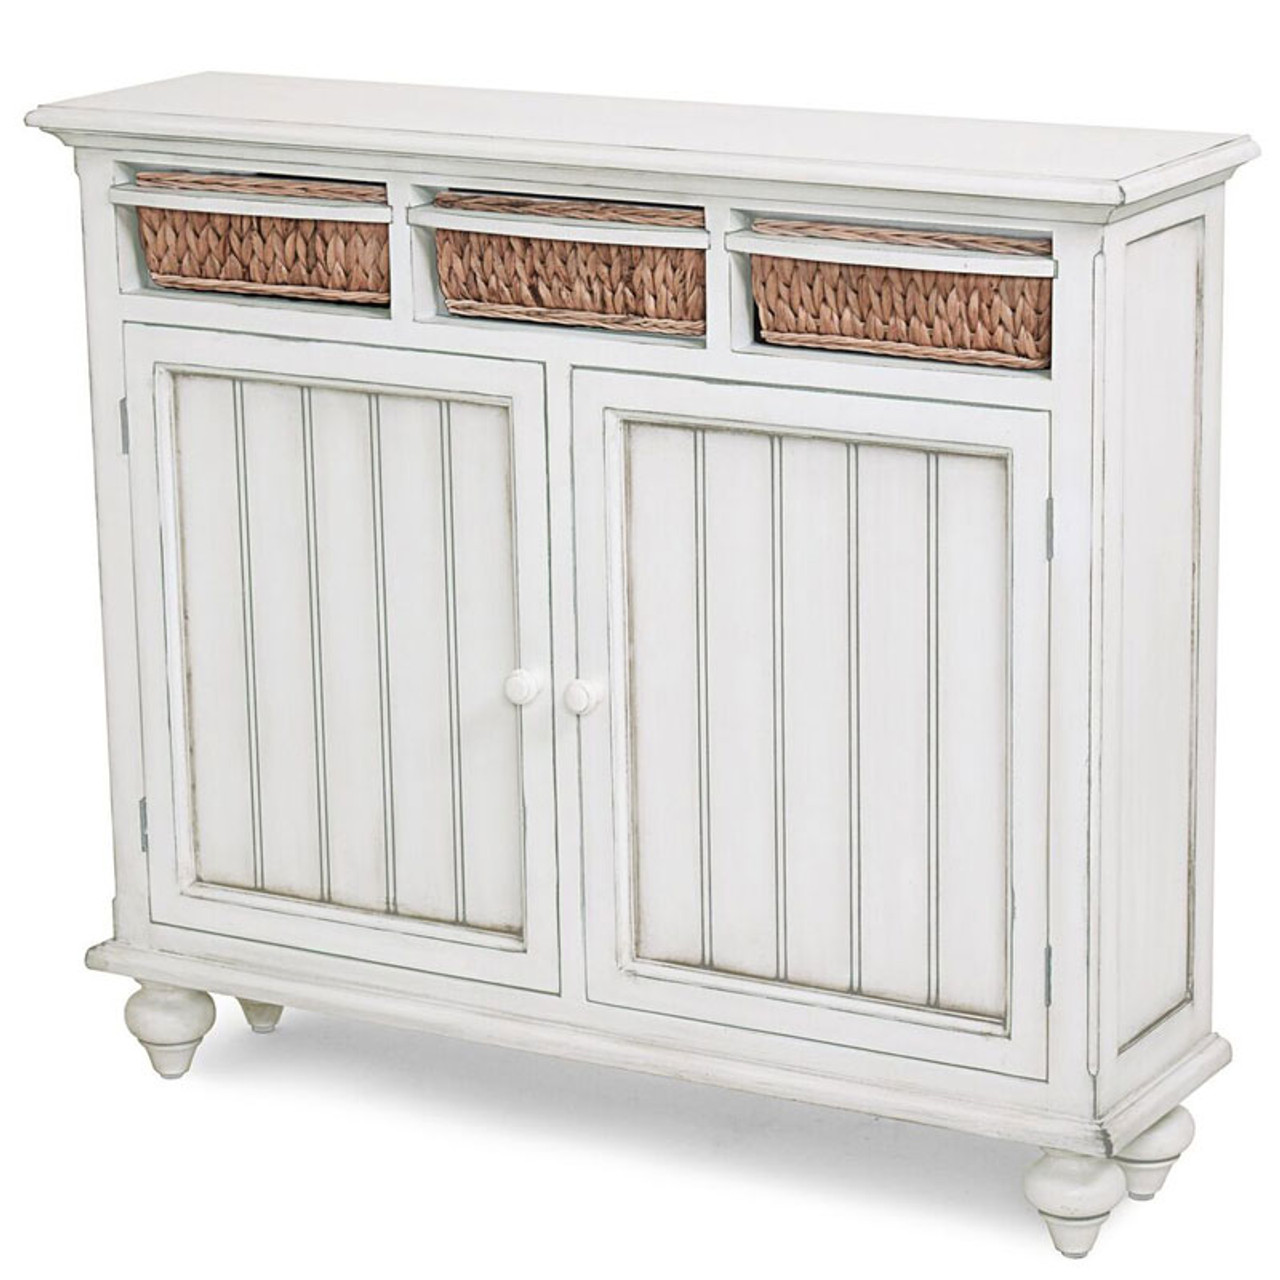 Antique White Wood Cabinet With Baskets